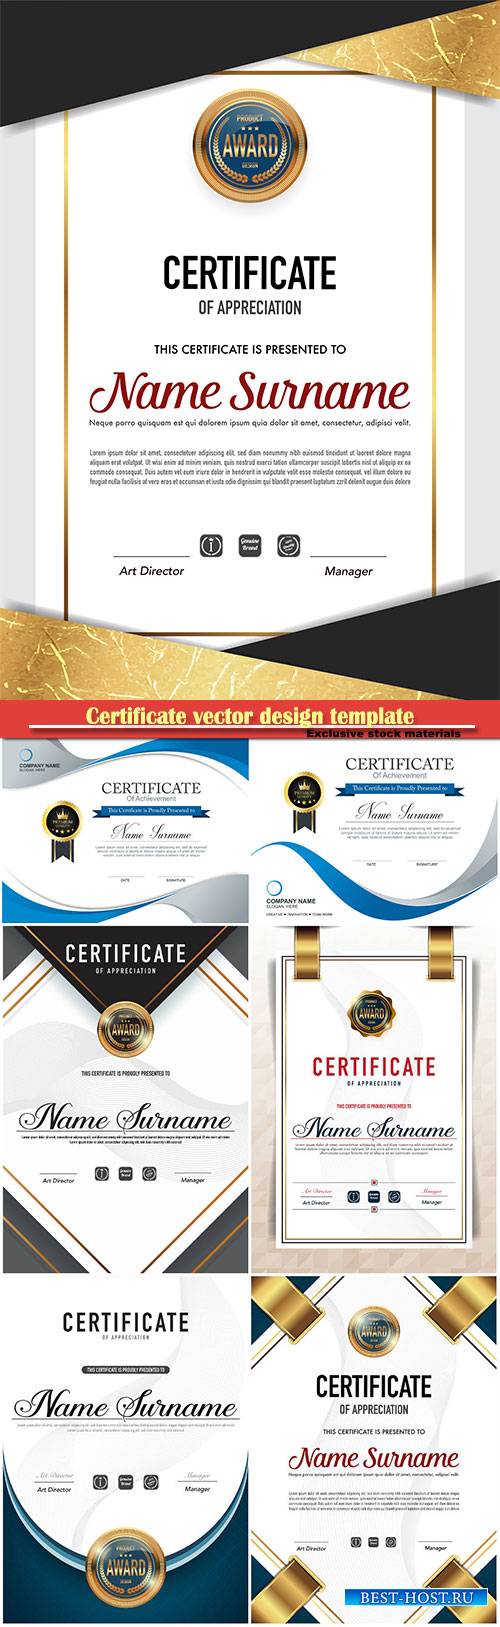 Certificate and vector diploma design template # 75